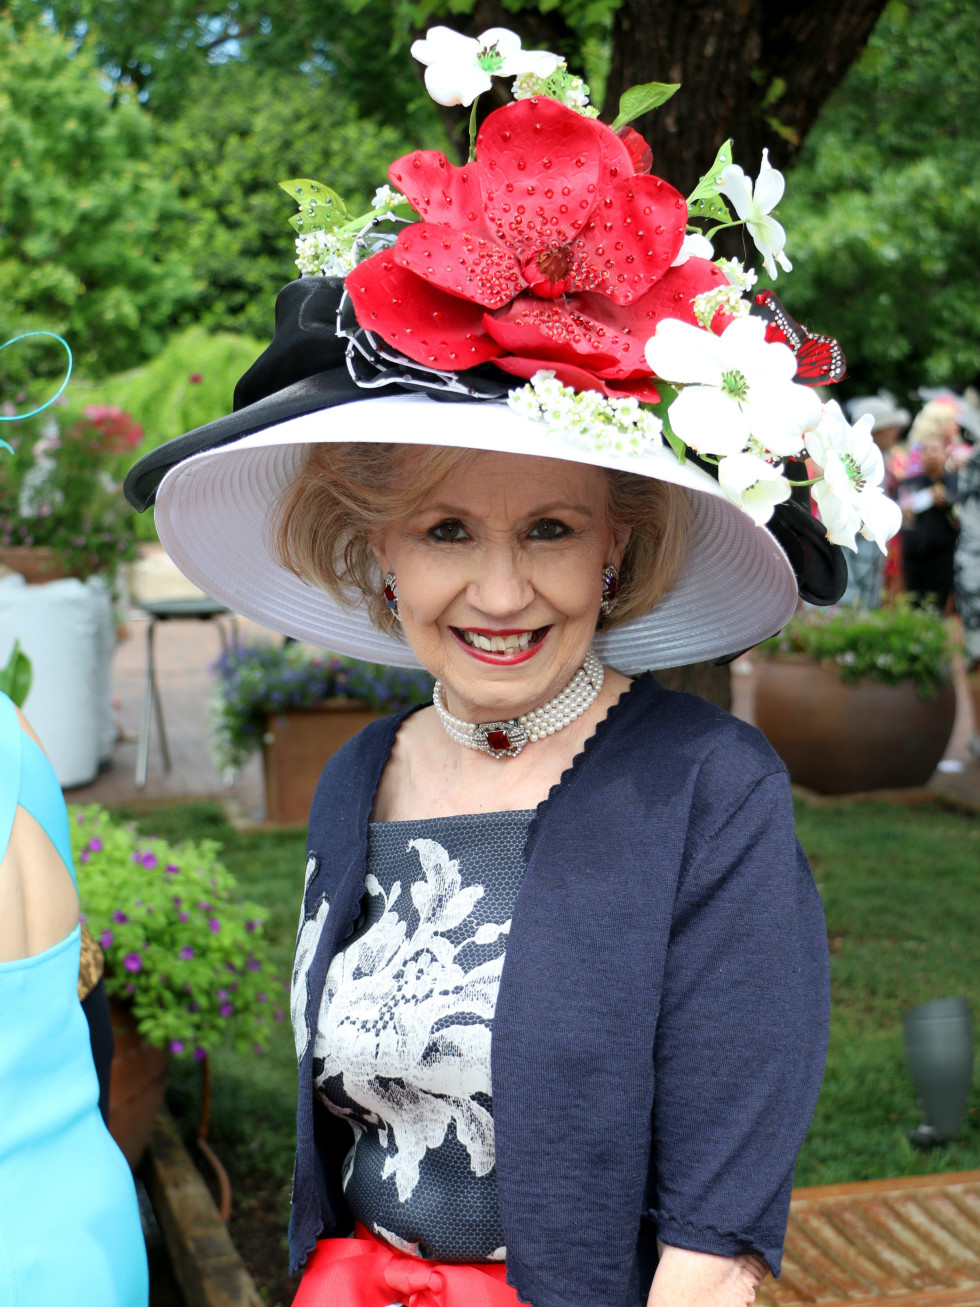 Dallas Mad Hatters put on a show for Steel Magnoliasthemed luncheon